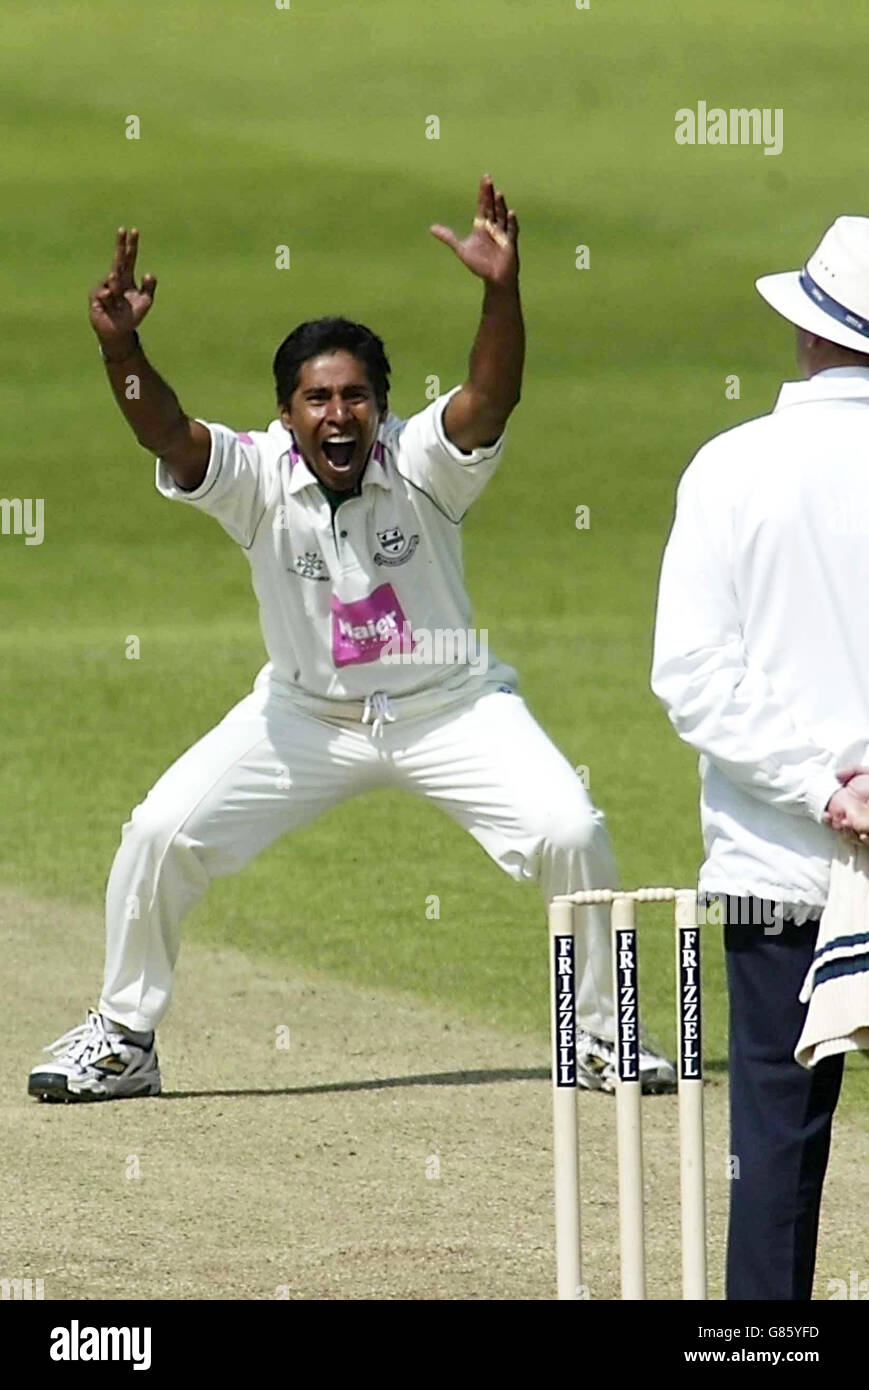 Cricket - Frizzell County Championship Divisione due - Worcestershire / Lancashire - New Road. Il Chaminda Vaas di Worcestershire si appella in modo insoddisfacente. Foto Stock